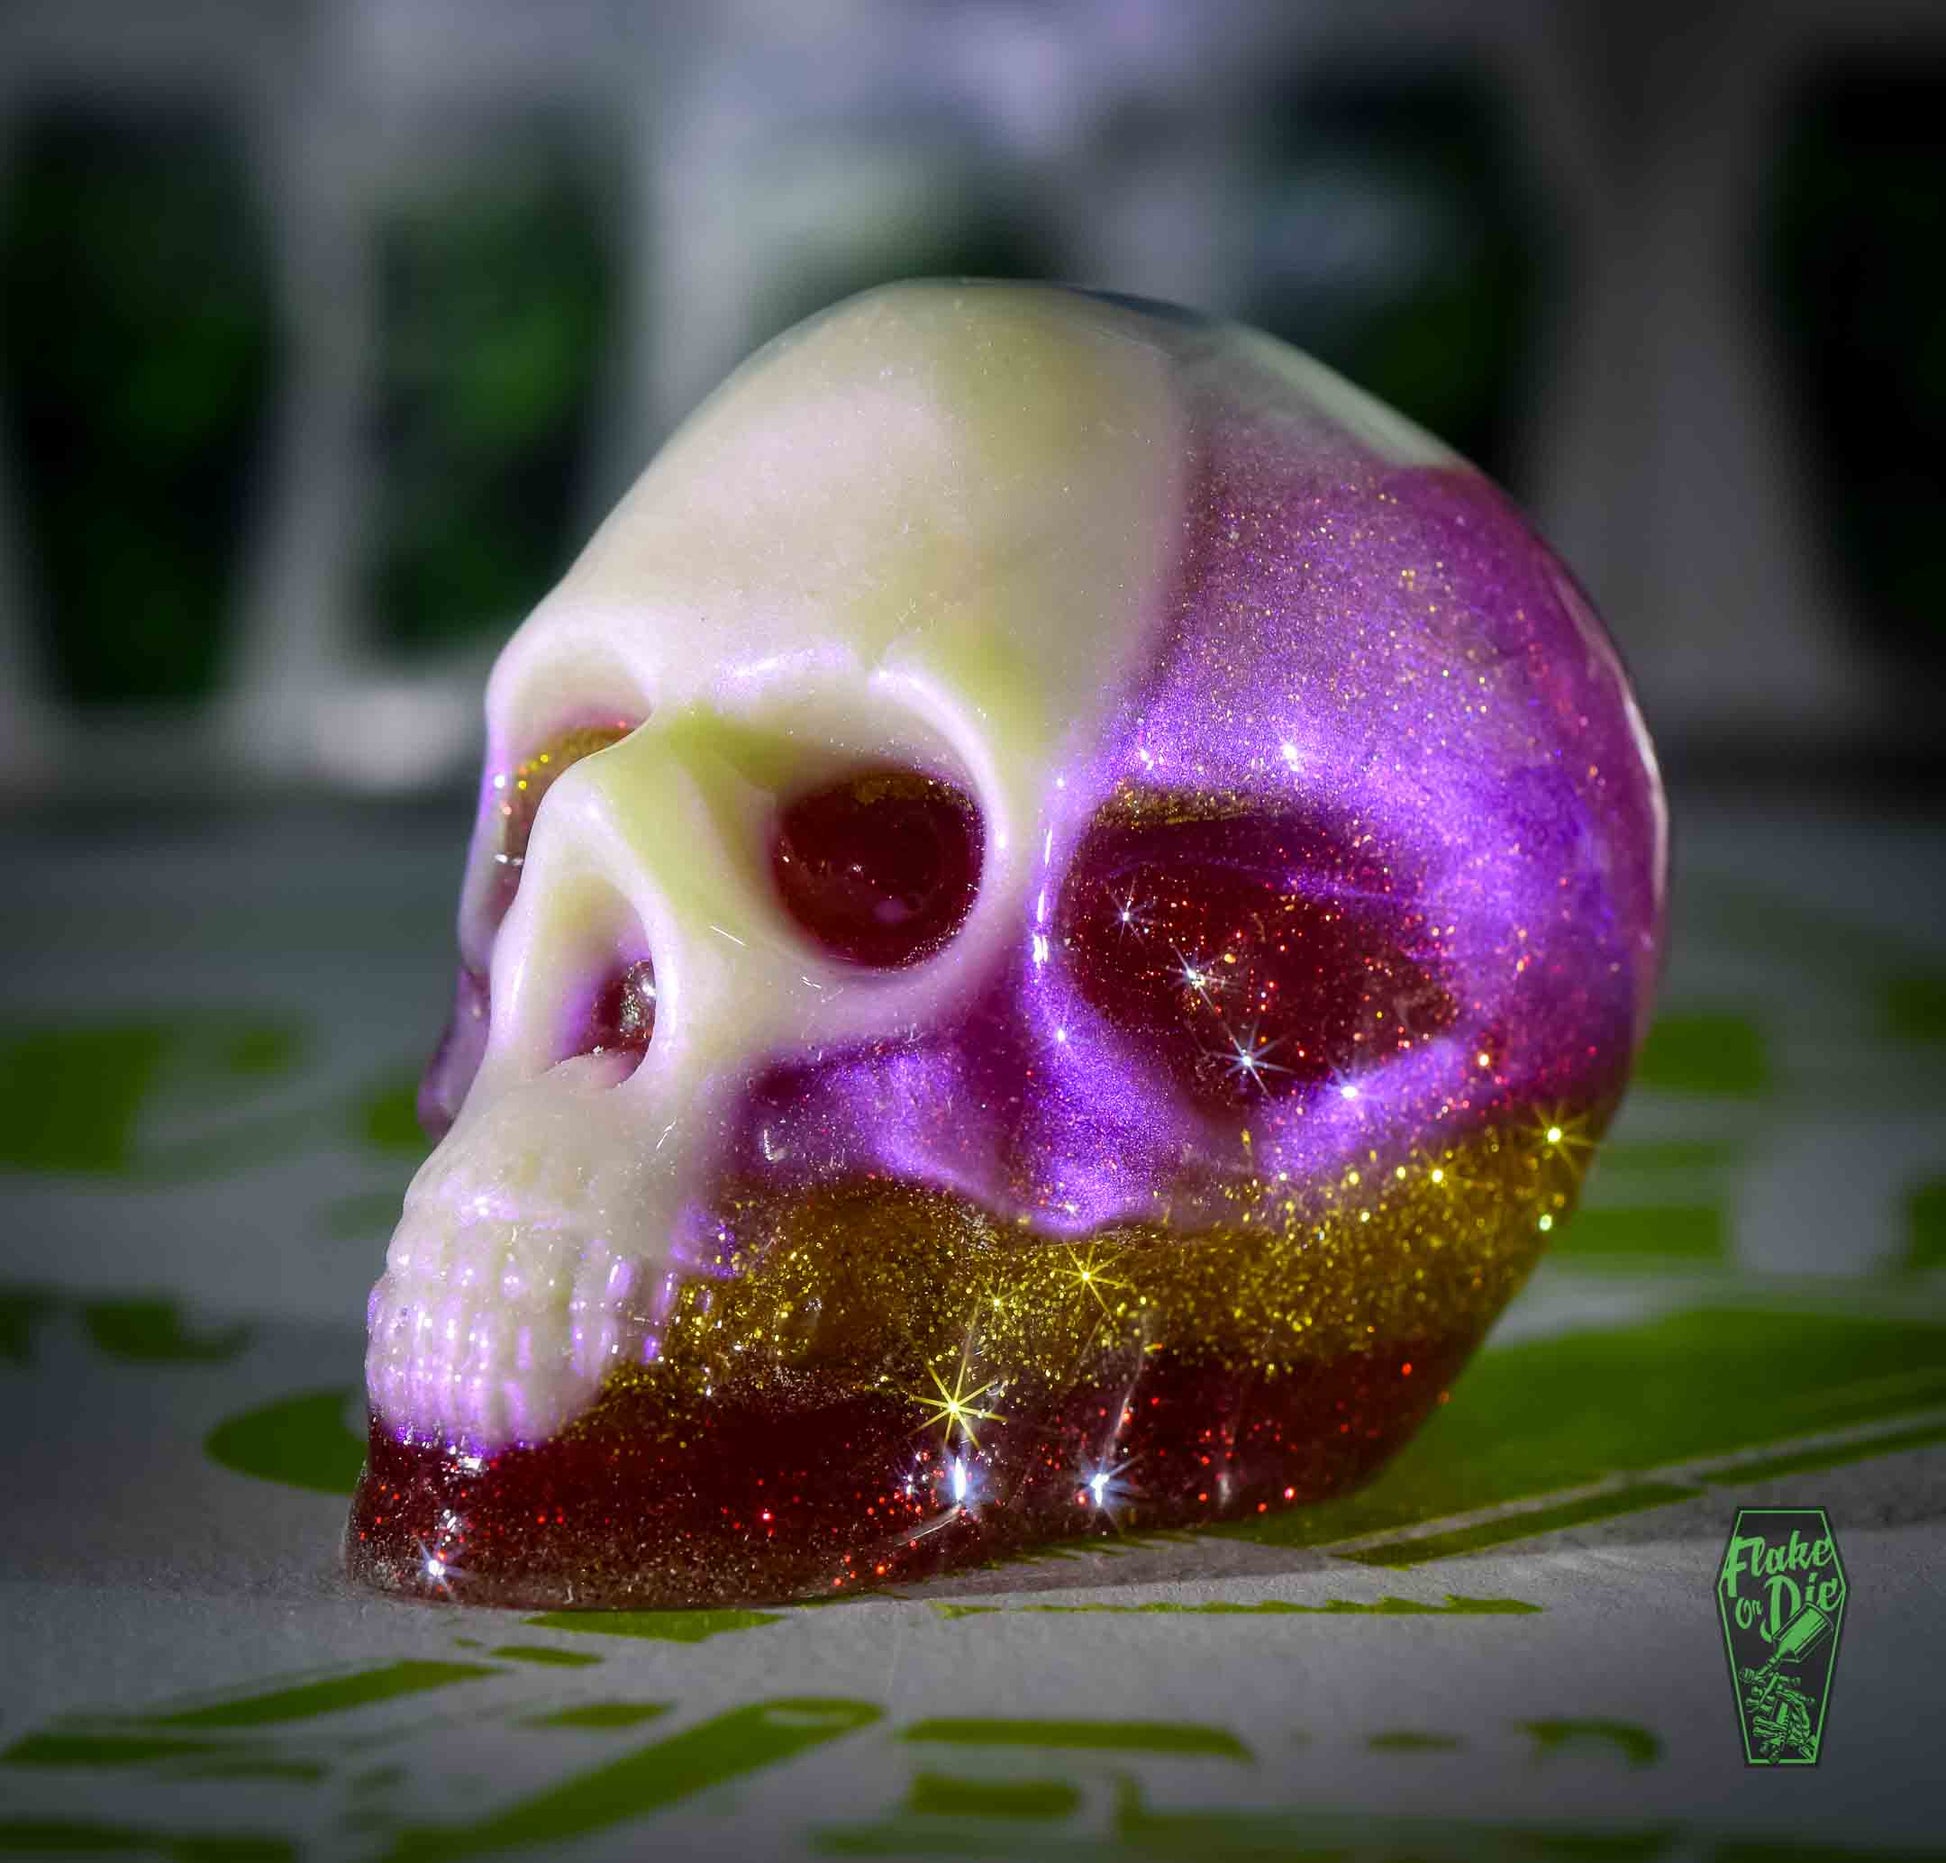 Skull cast with metal flake and pearl pigments in clear liquid plastic.